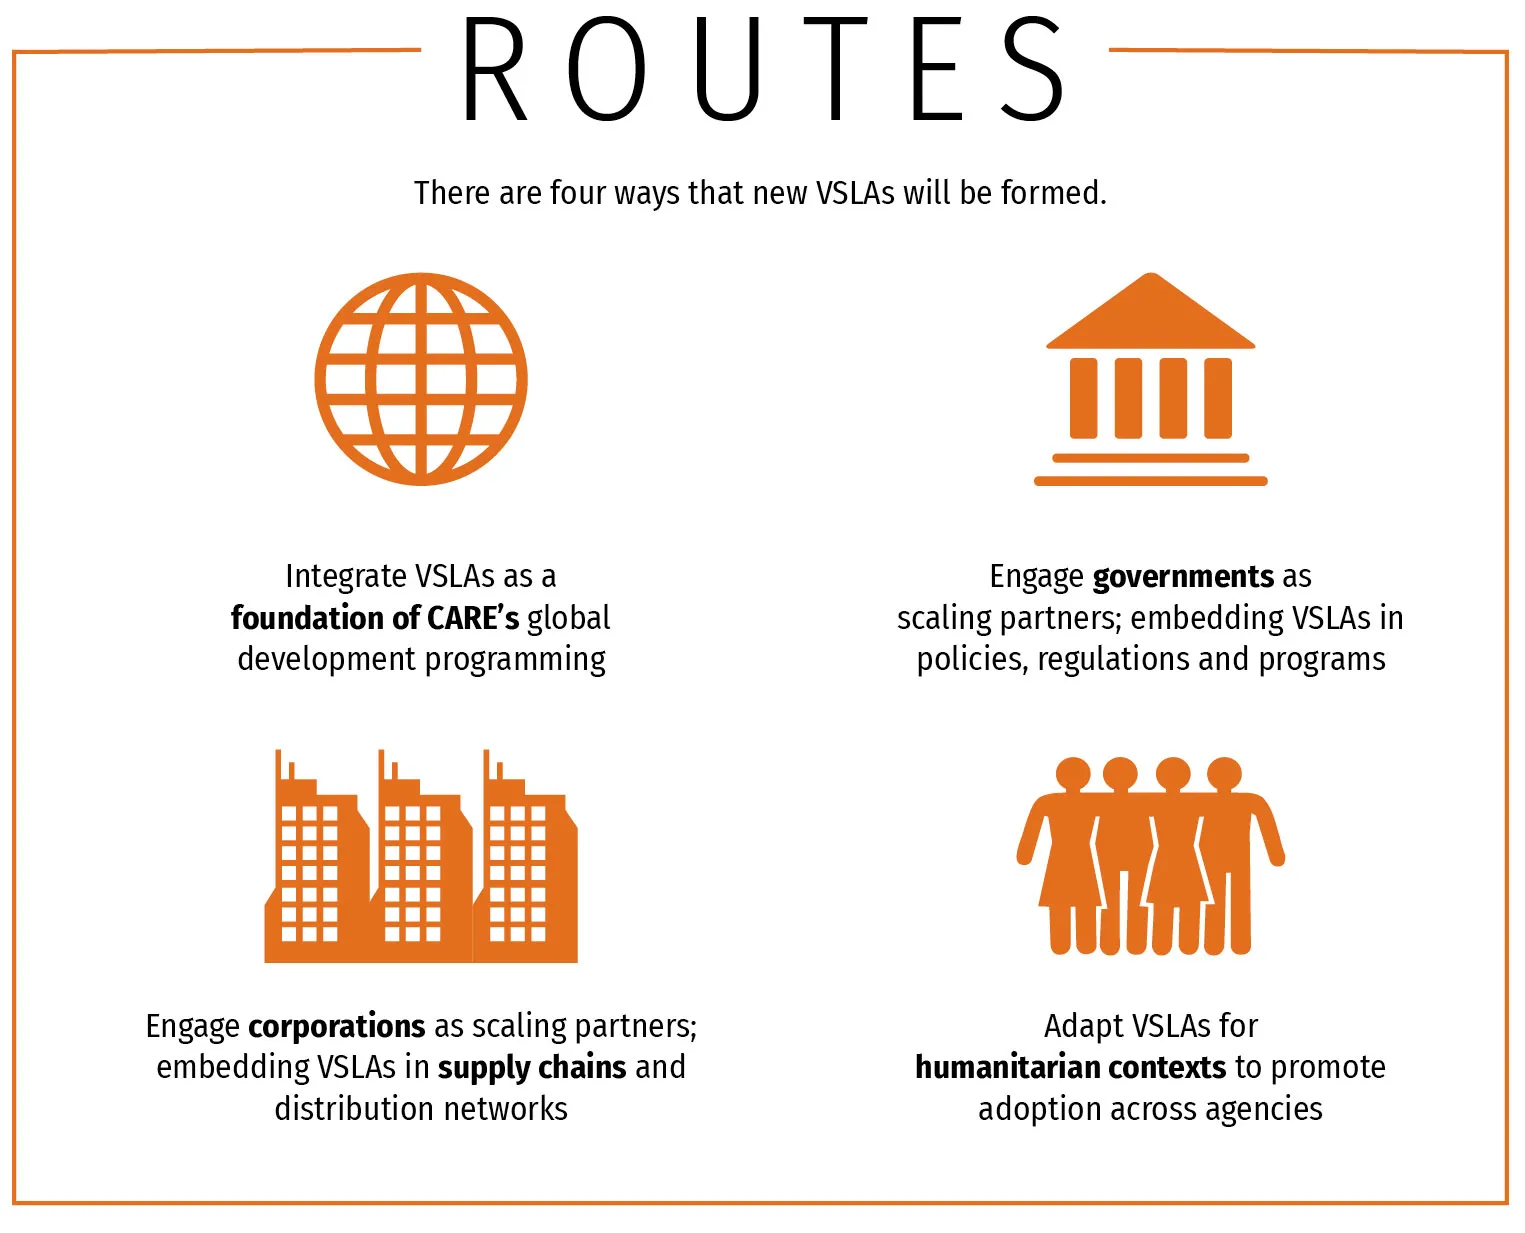 Infographic: There are 4 ways new VSLAs will be formed.